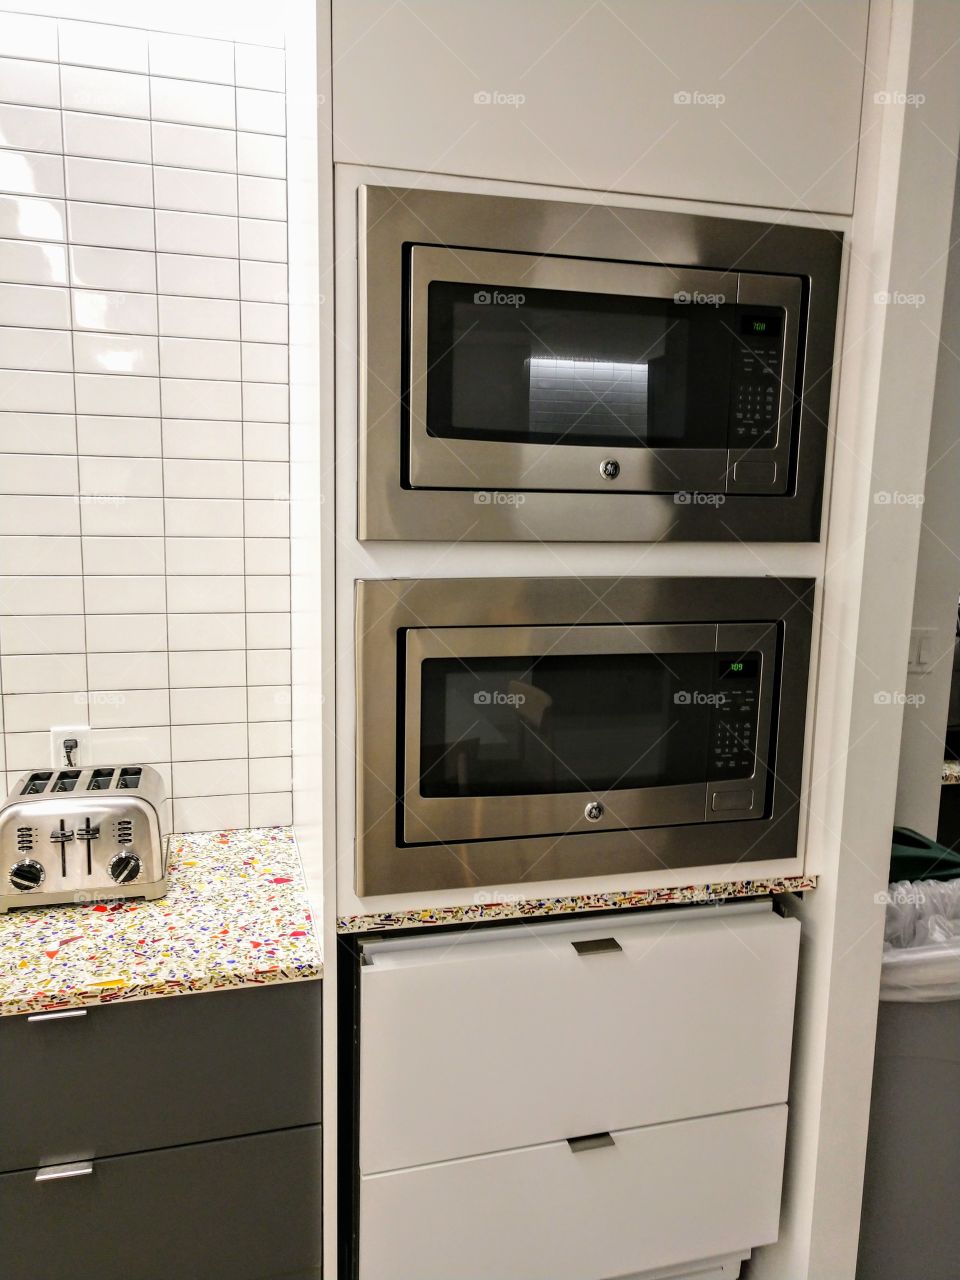 Two level microwave ovens next to toaster on counter